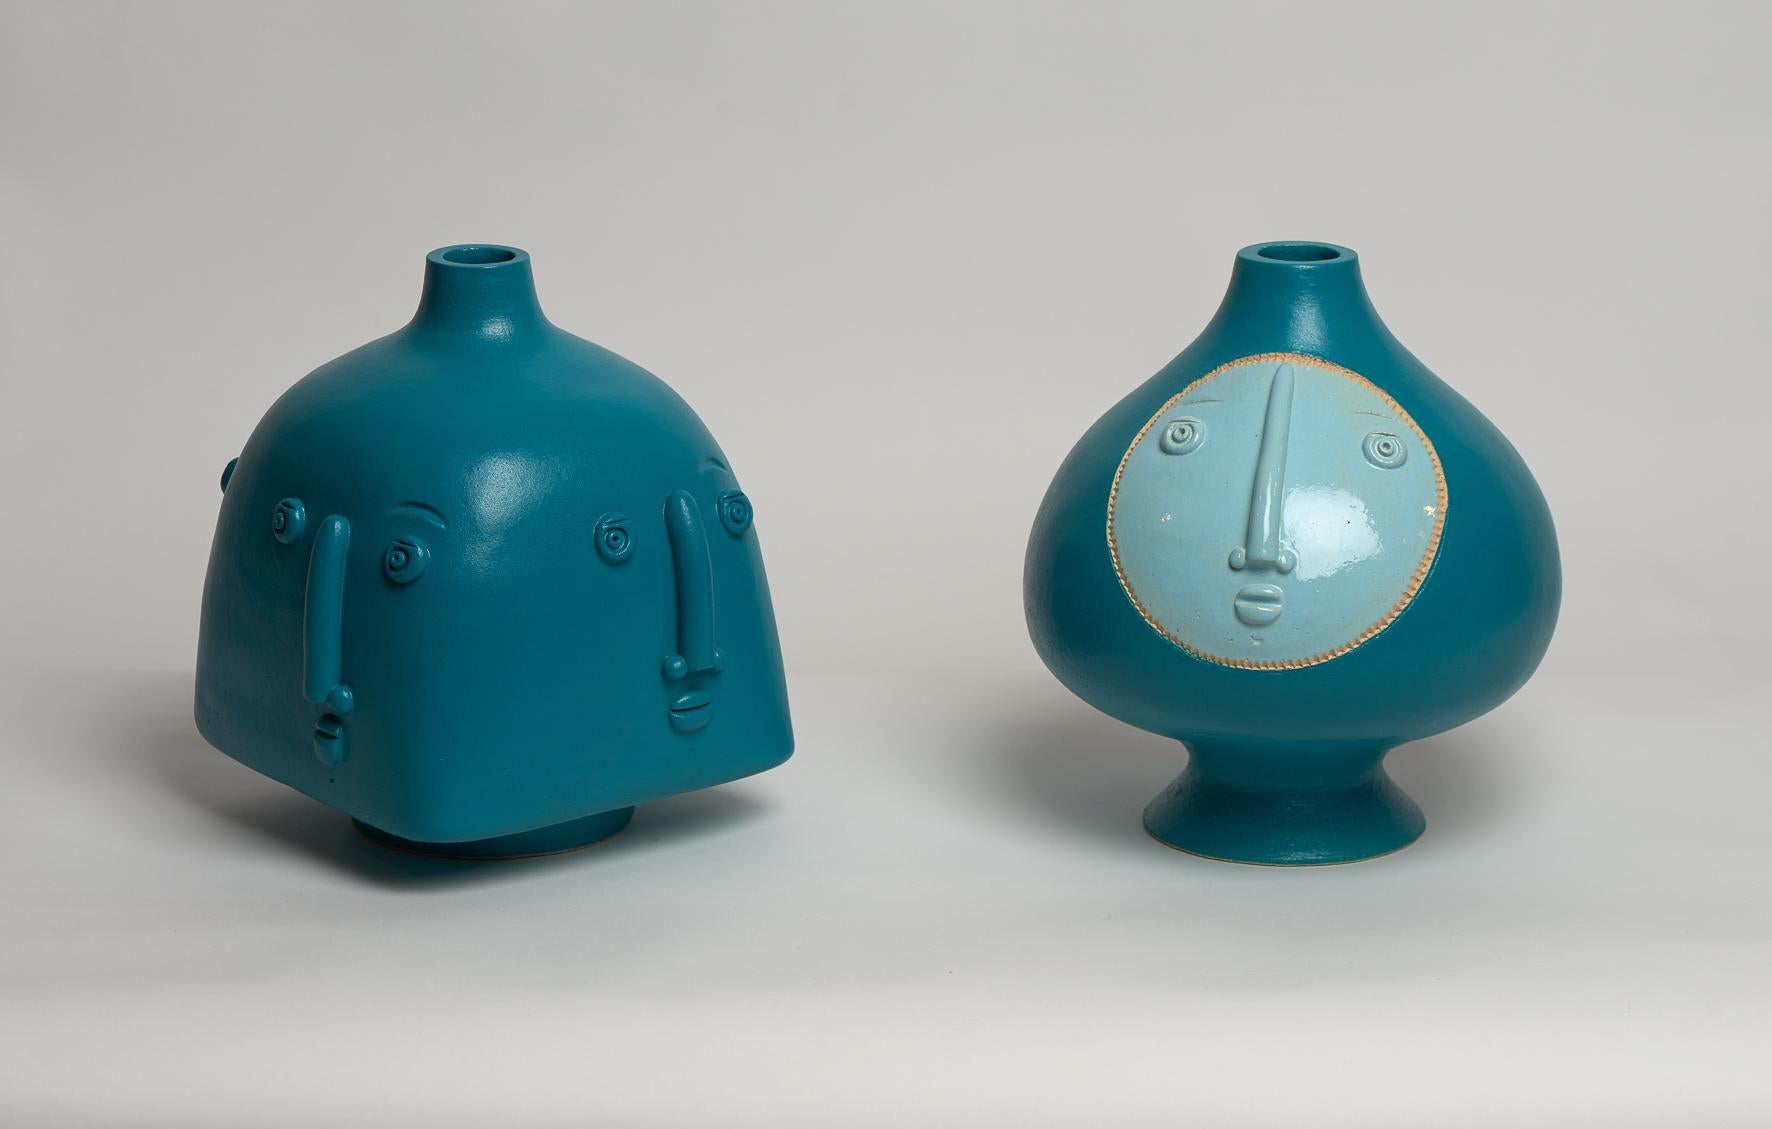 Two Hand-sculpted ceramic base lamps, stoneware glazed in Turquoise blue enamel.
One with 4 stylized faces, one with a face in a shinny clear blue enamel
One of a kind handmade pieces signed by the French ceramicists Dalo.

The height dimension